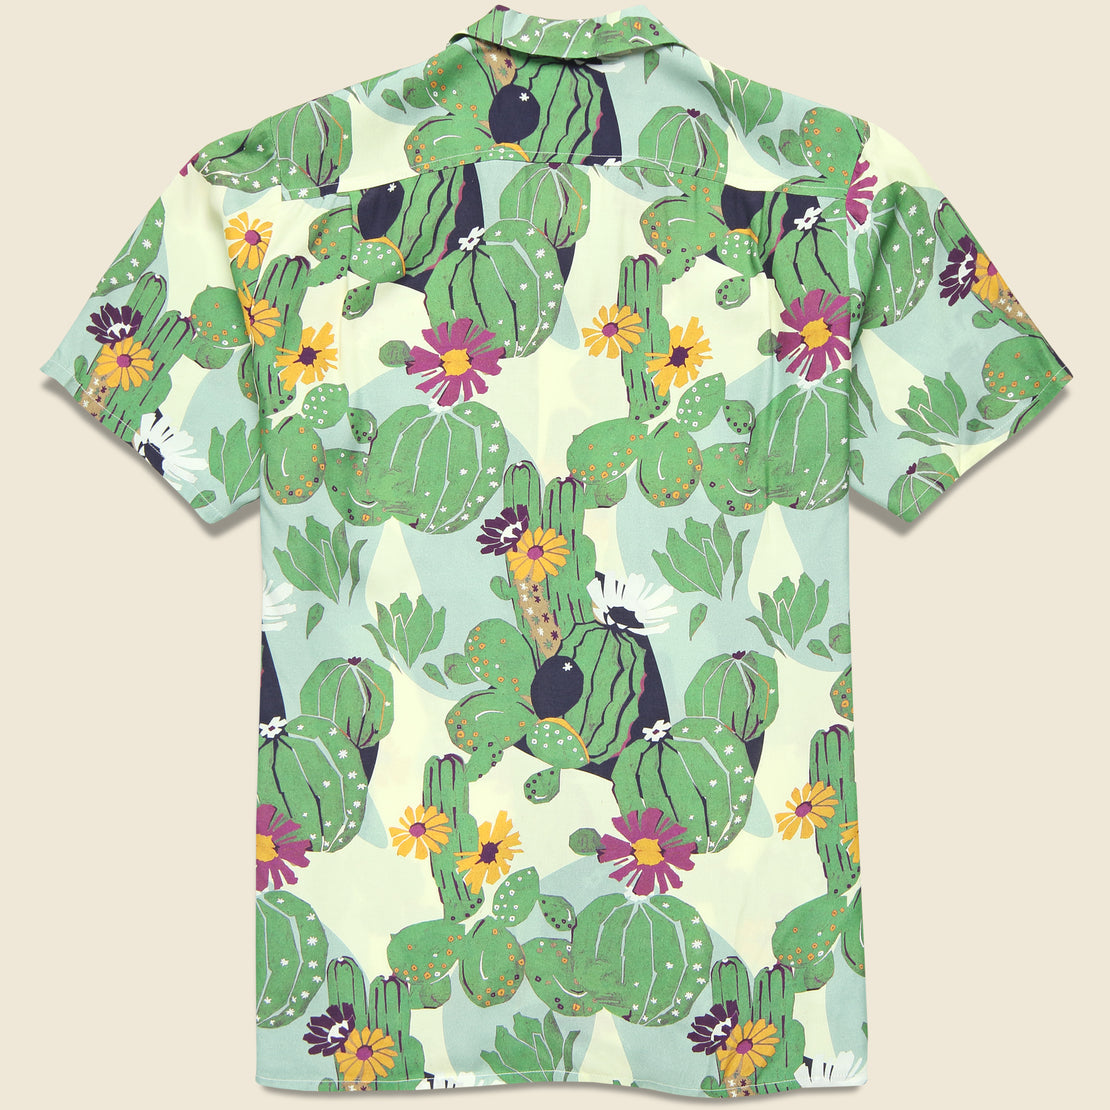 Cactus Camp Shirt - Multi - Bather - STAG Provisions - Tops - S/S Woven - Other Pattern